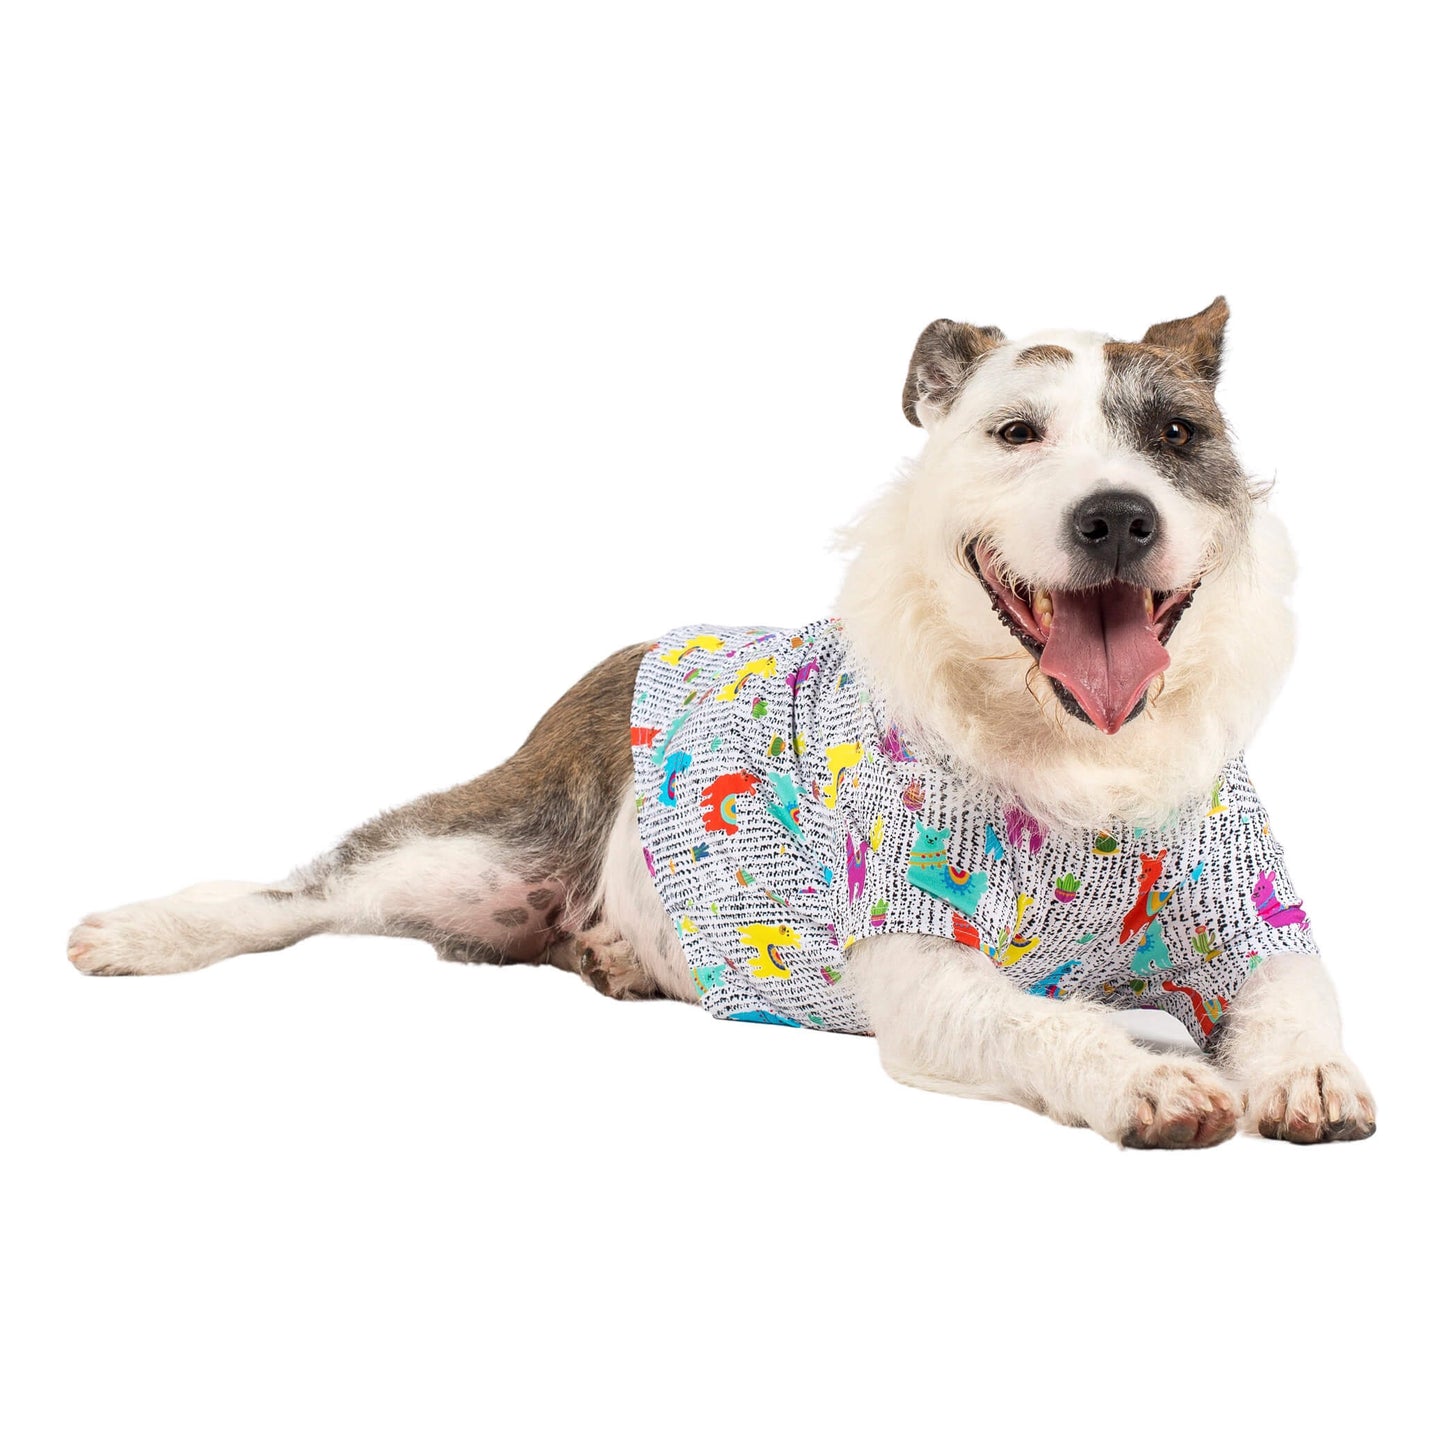 A white and grey dog wearing a No Probllama shirt for dogs.